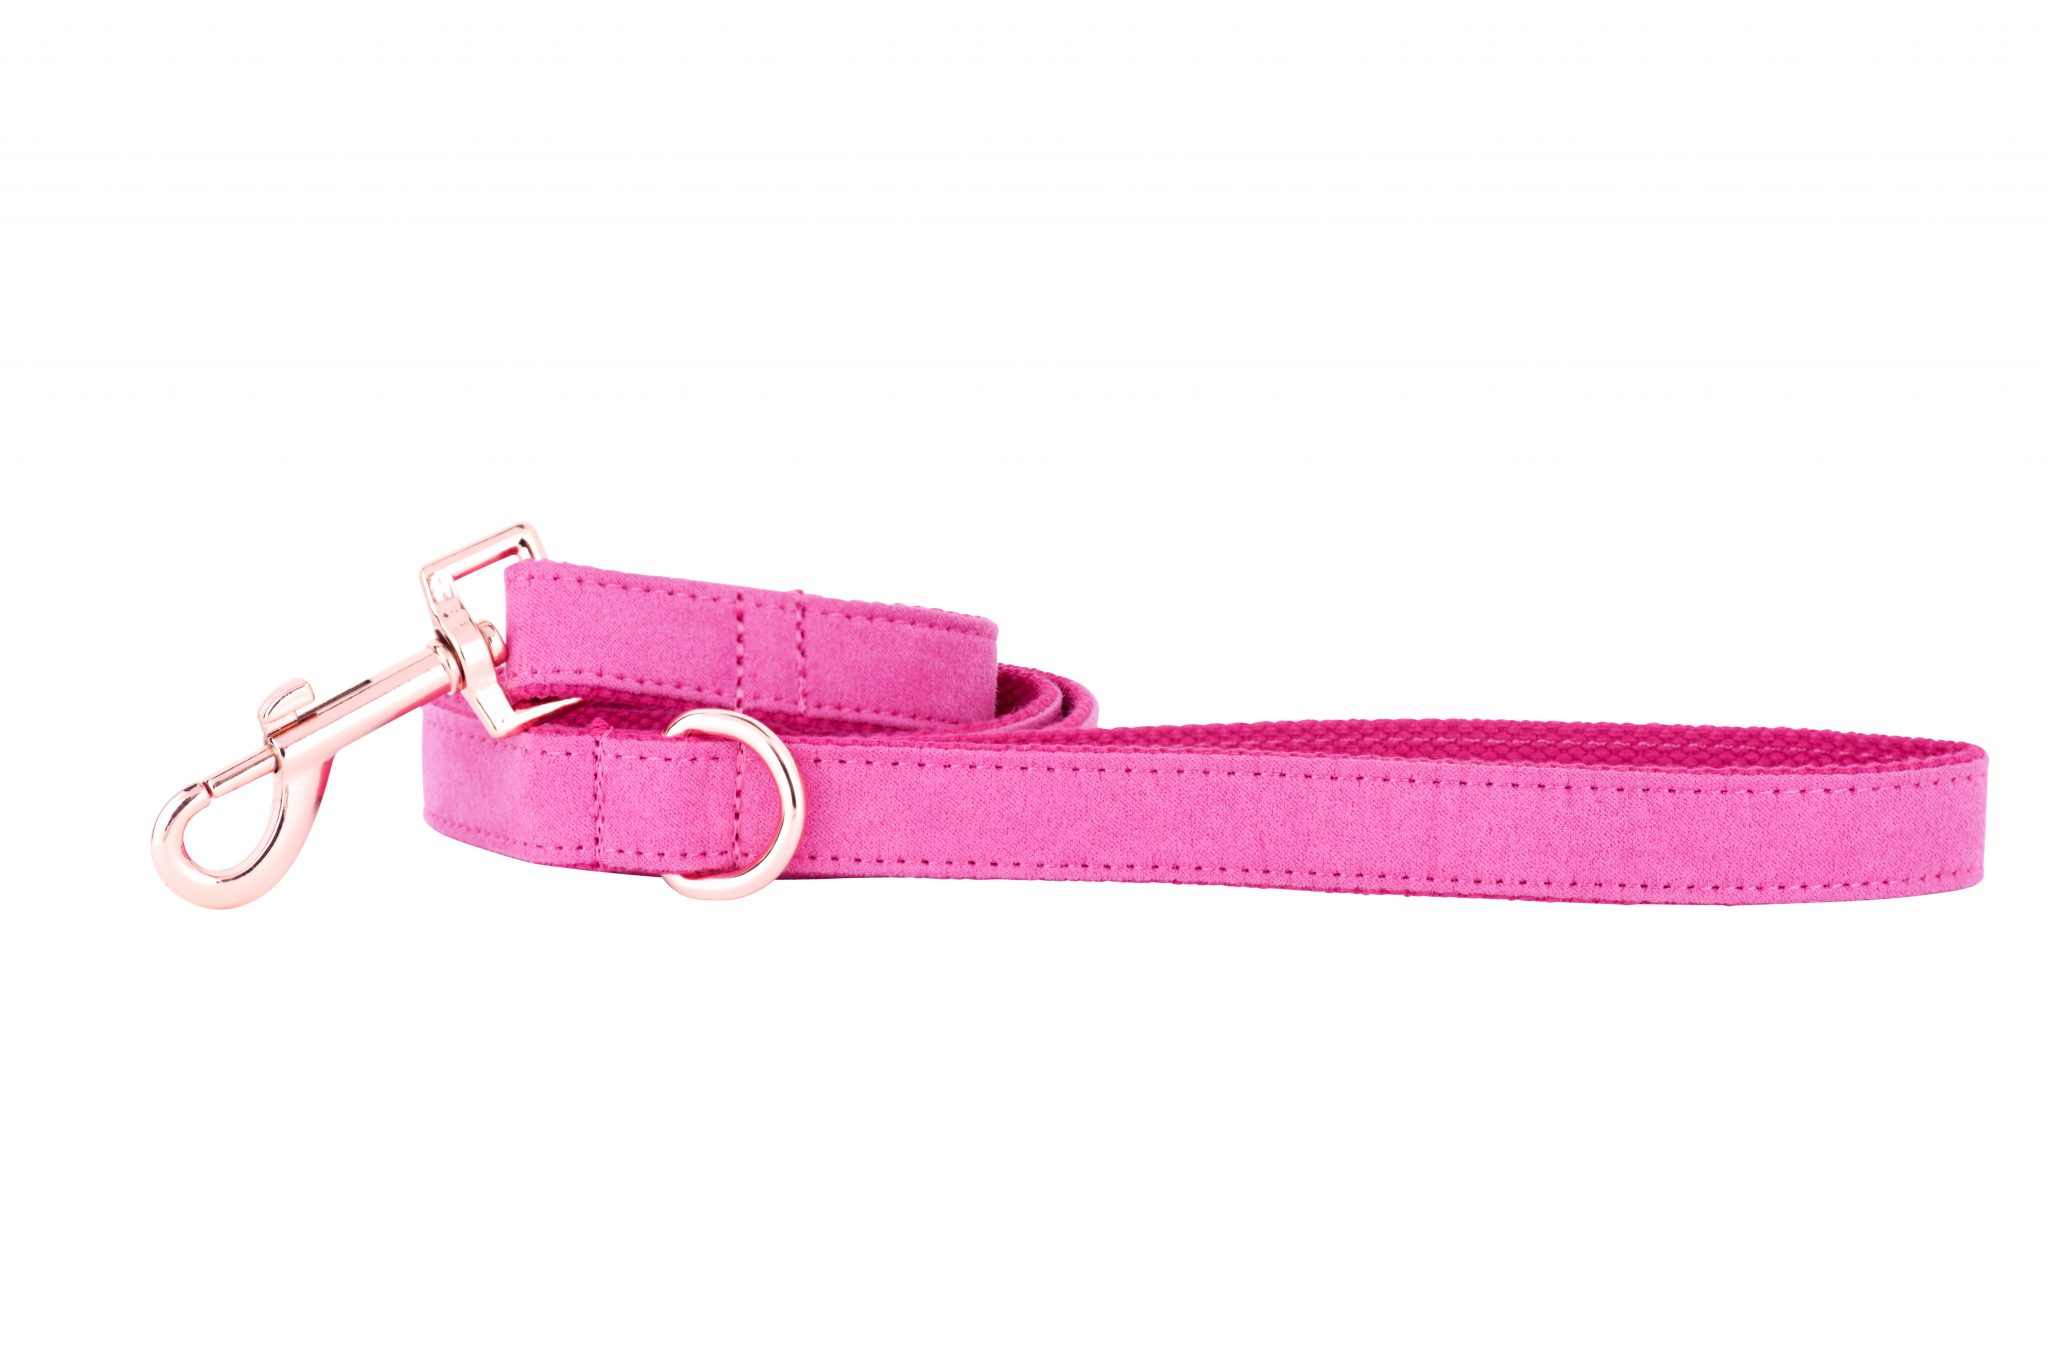 PINK designer dog lead by IWOOF with rose gold fittings